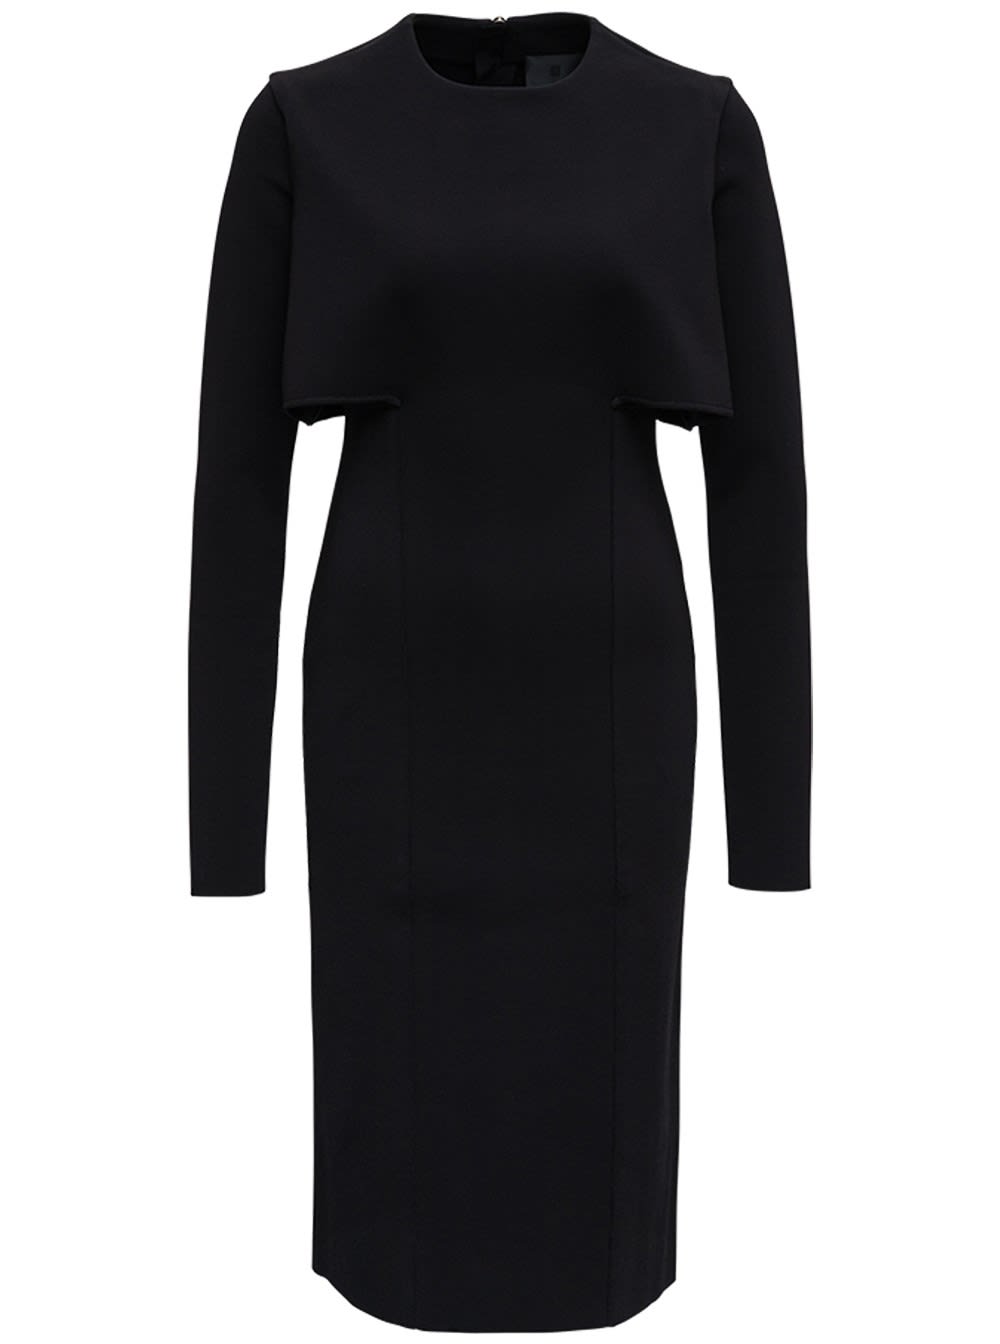 Givenchy Black Dress With Cut-out Inserts